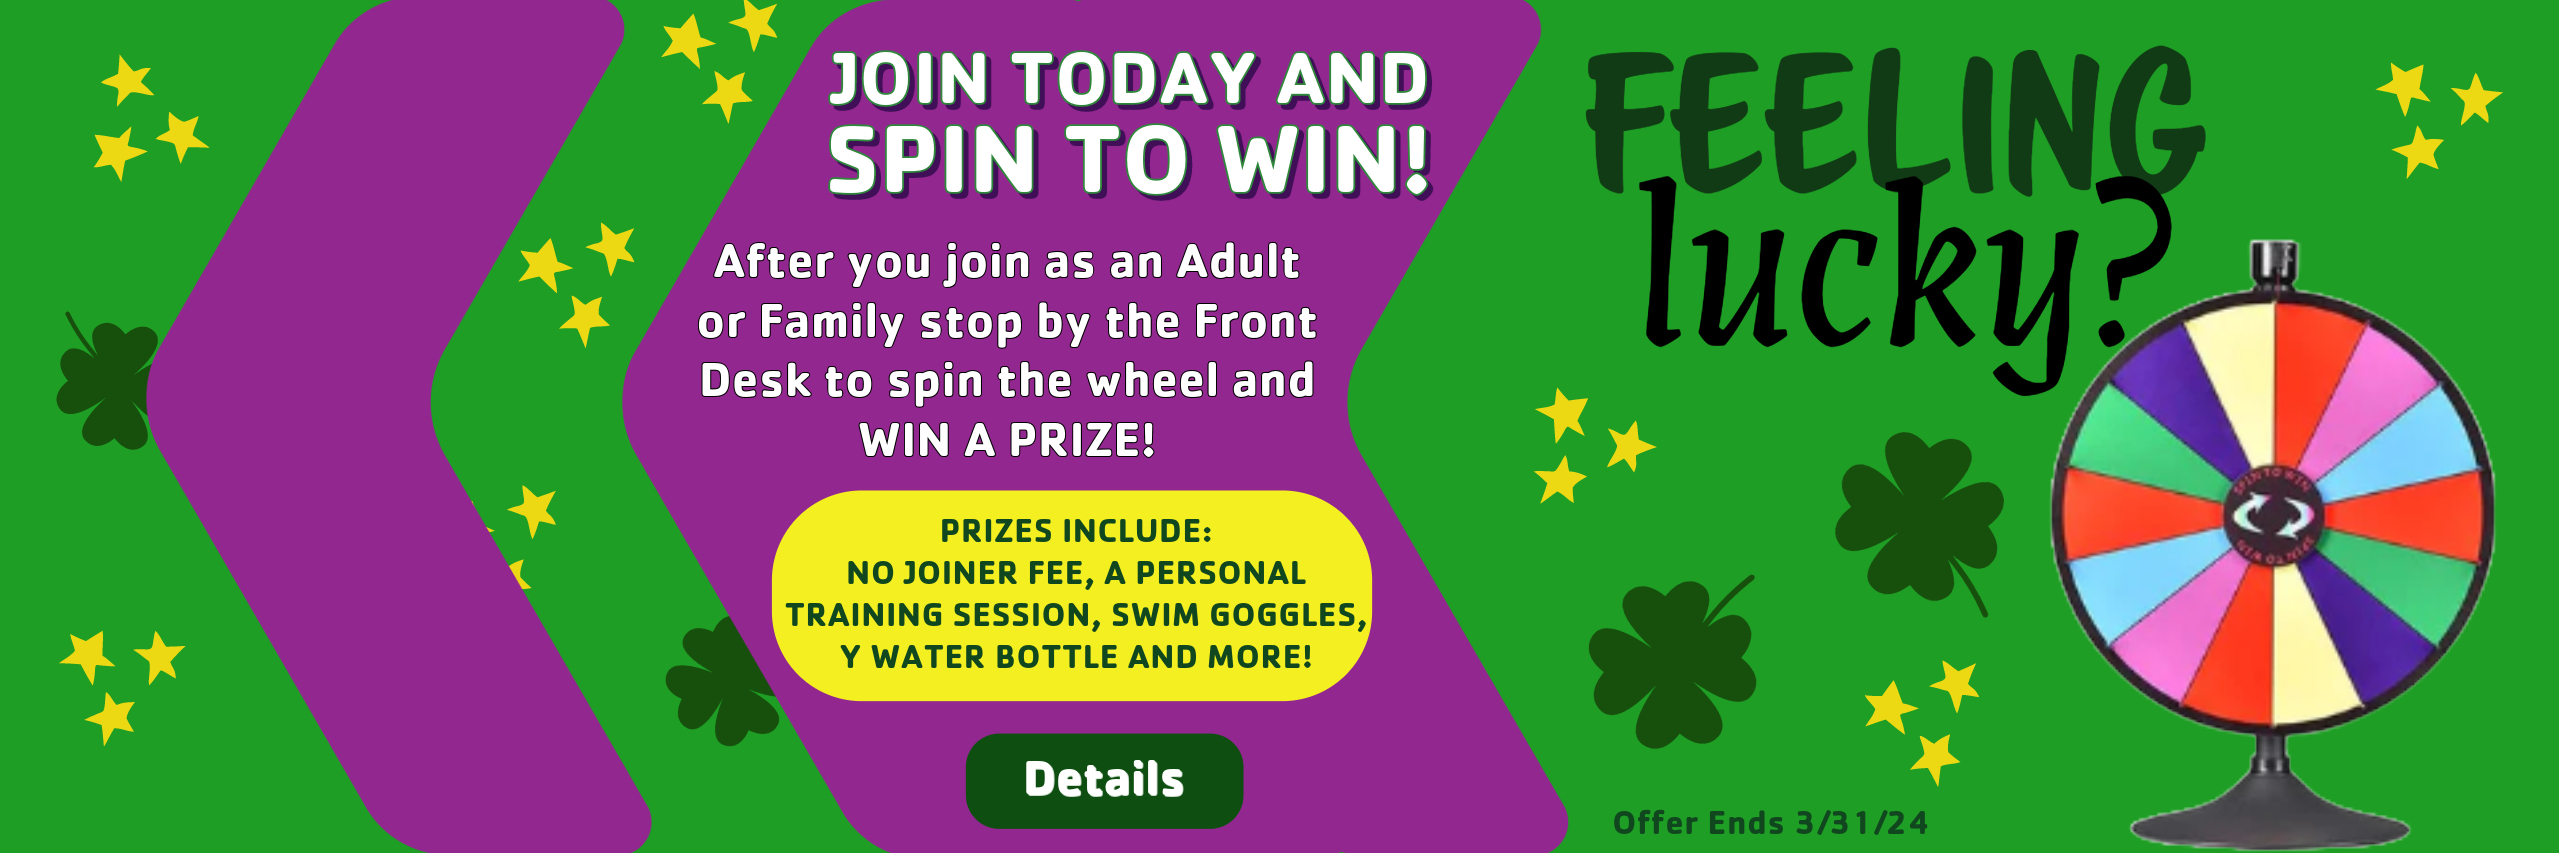 March Member Promo Spin to Win